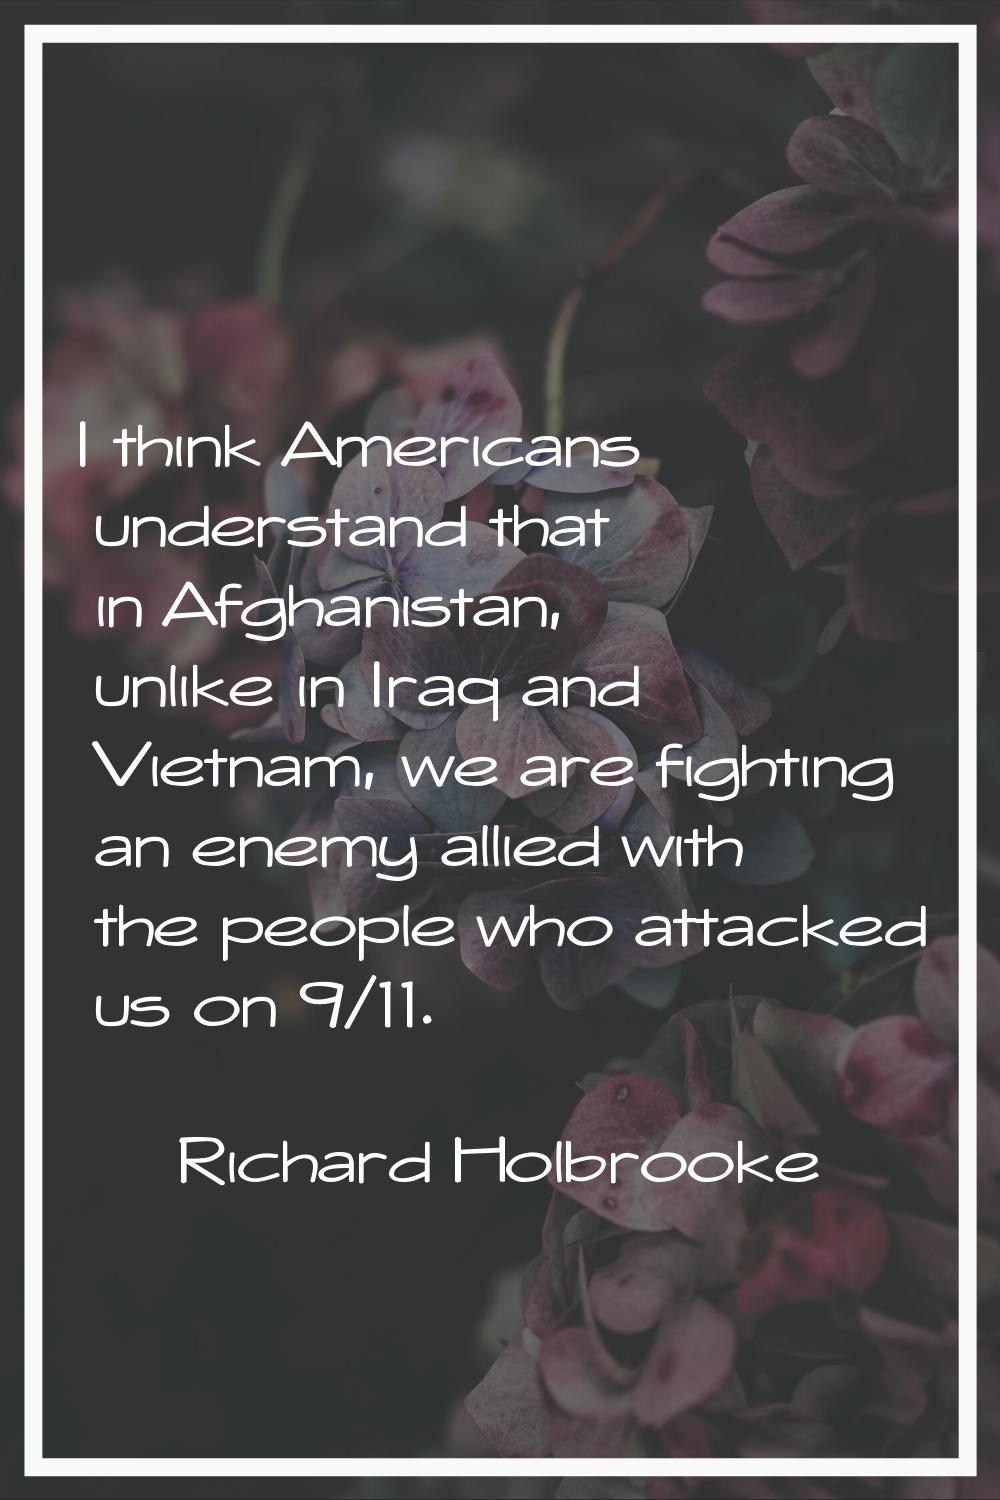 I think Americans understand that in Afghanistan, unlike in Iraq and Vietnam, we are fighting an en